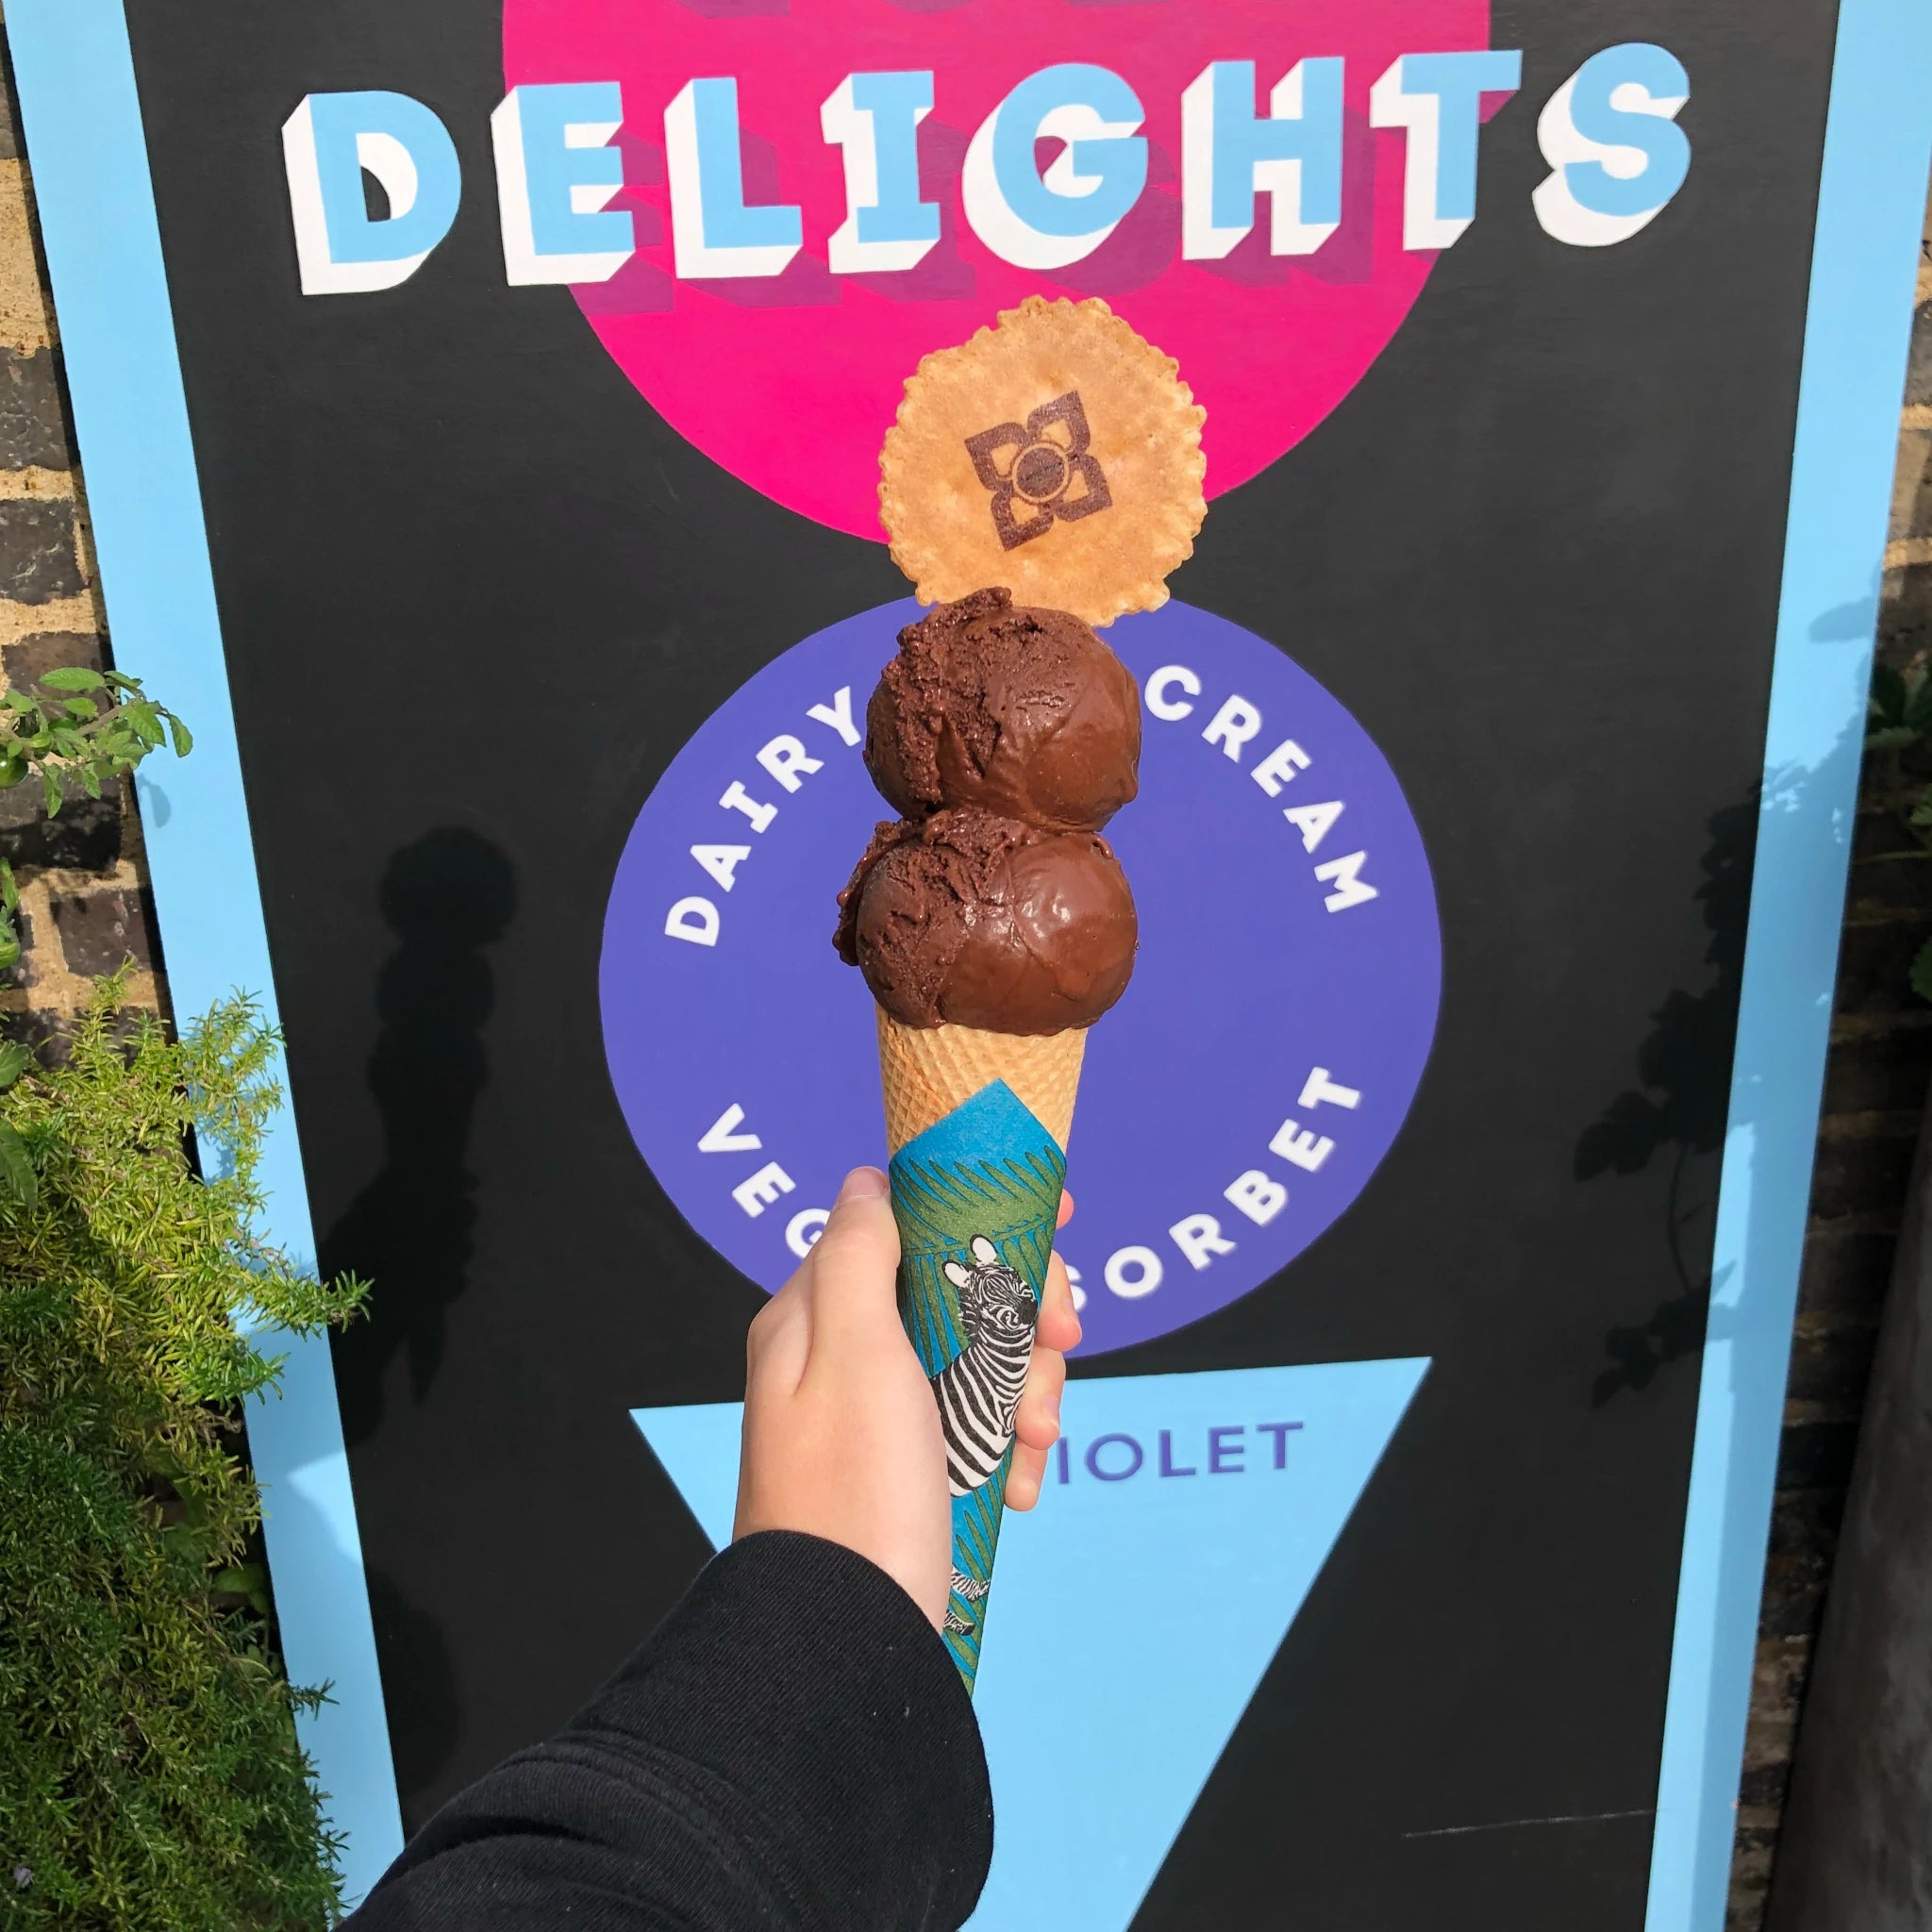 Two scoops of Belgian Chocolate Ice Cream on a cone